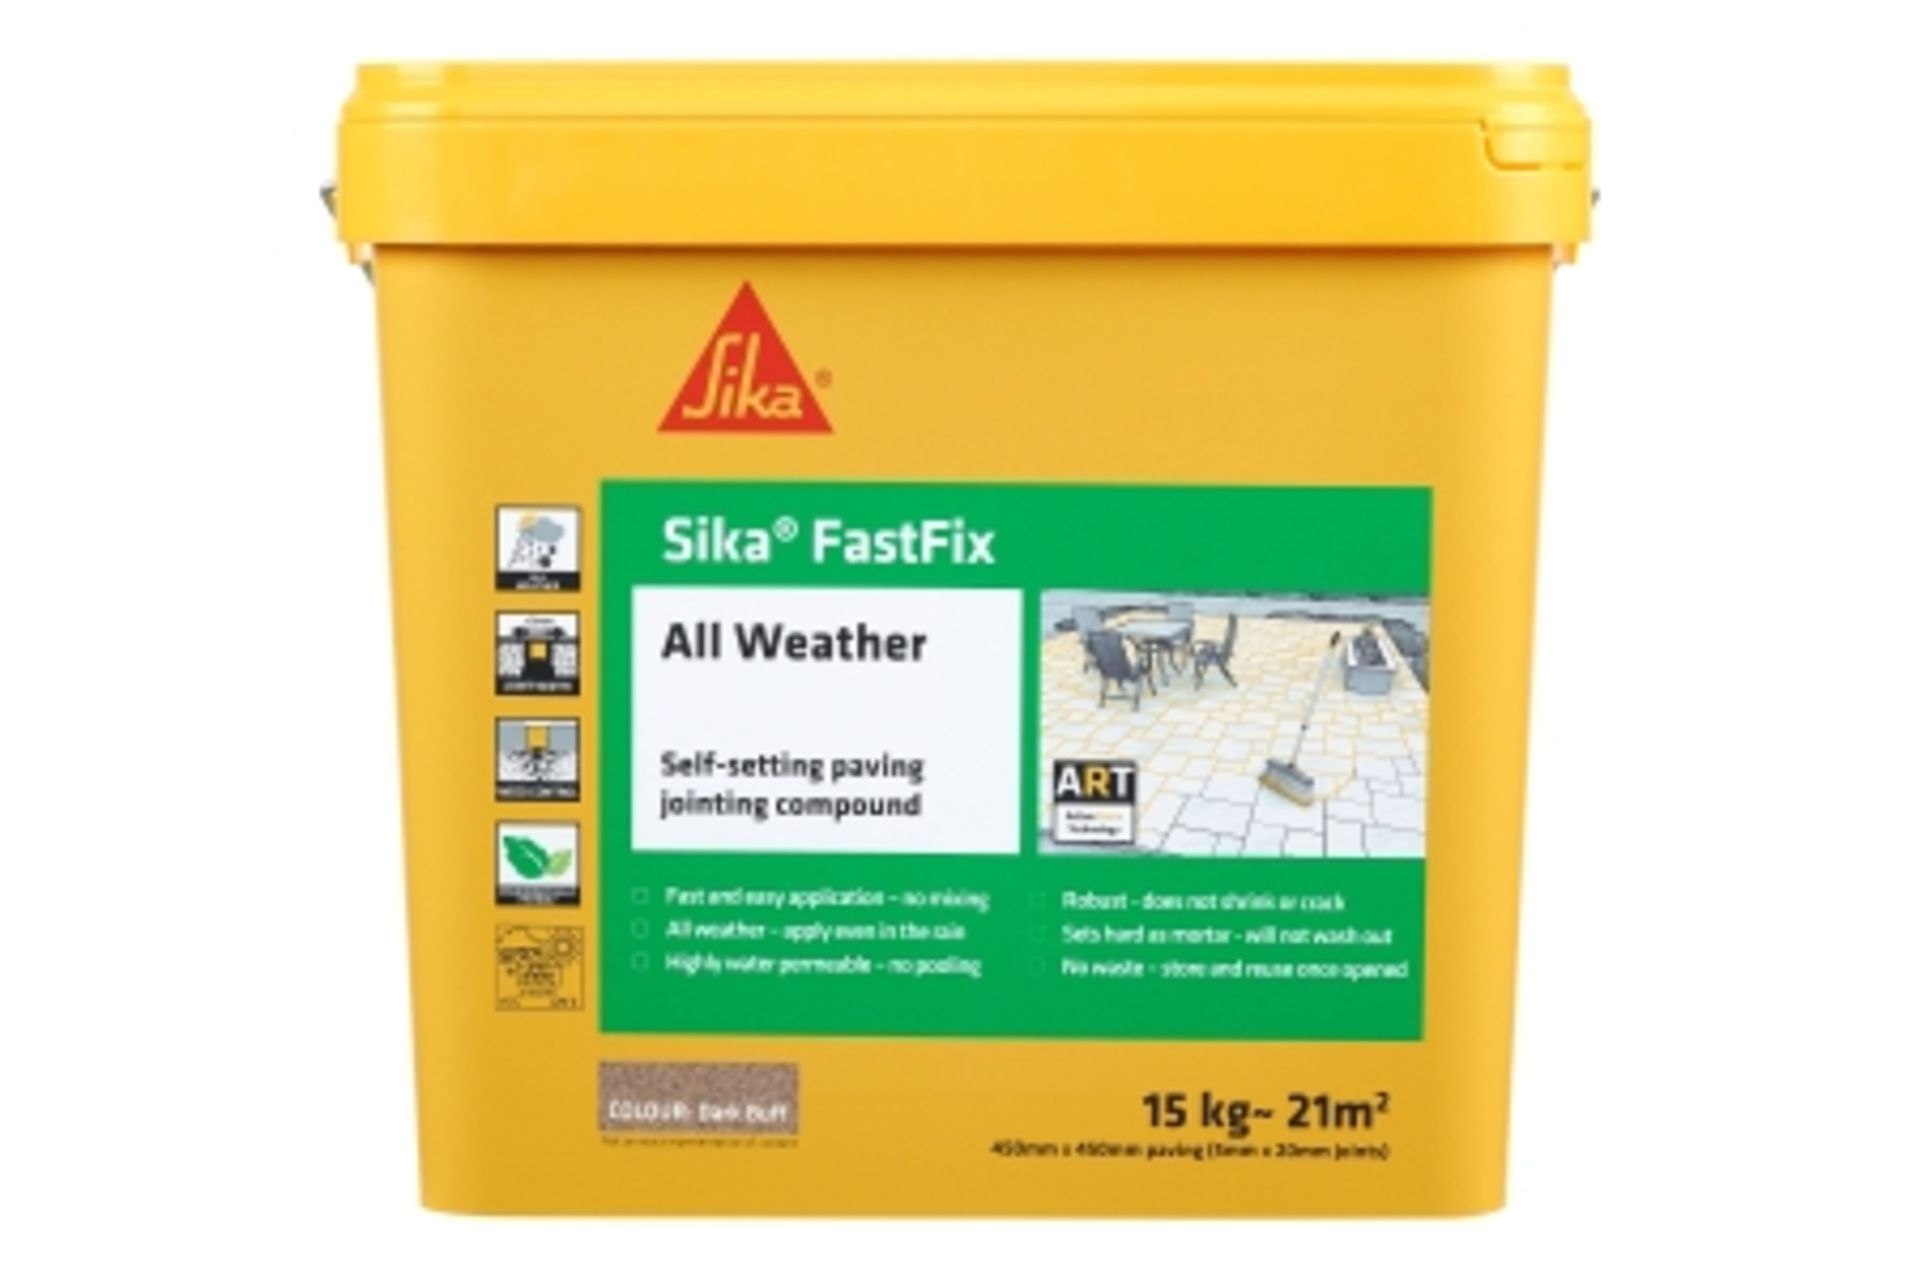 2 x 14 kg Sika Fast Fix All Weather Self Setting Jointing Compound DARK BUFF - Image 2 of 2